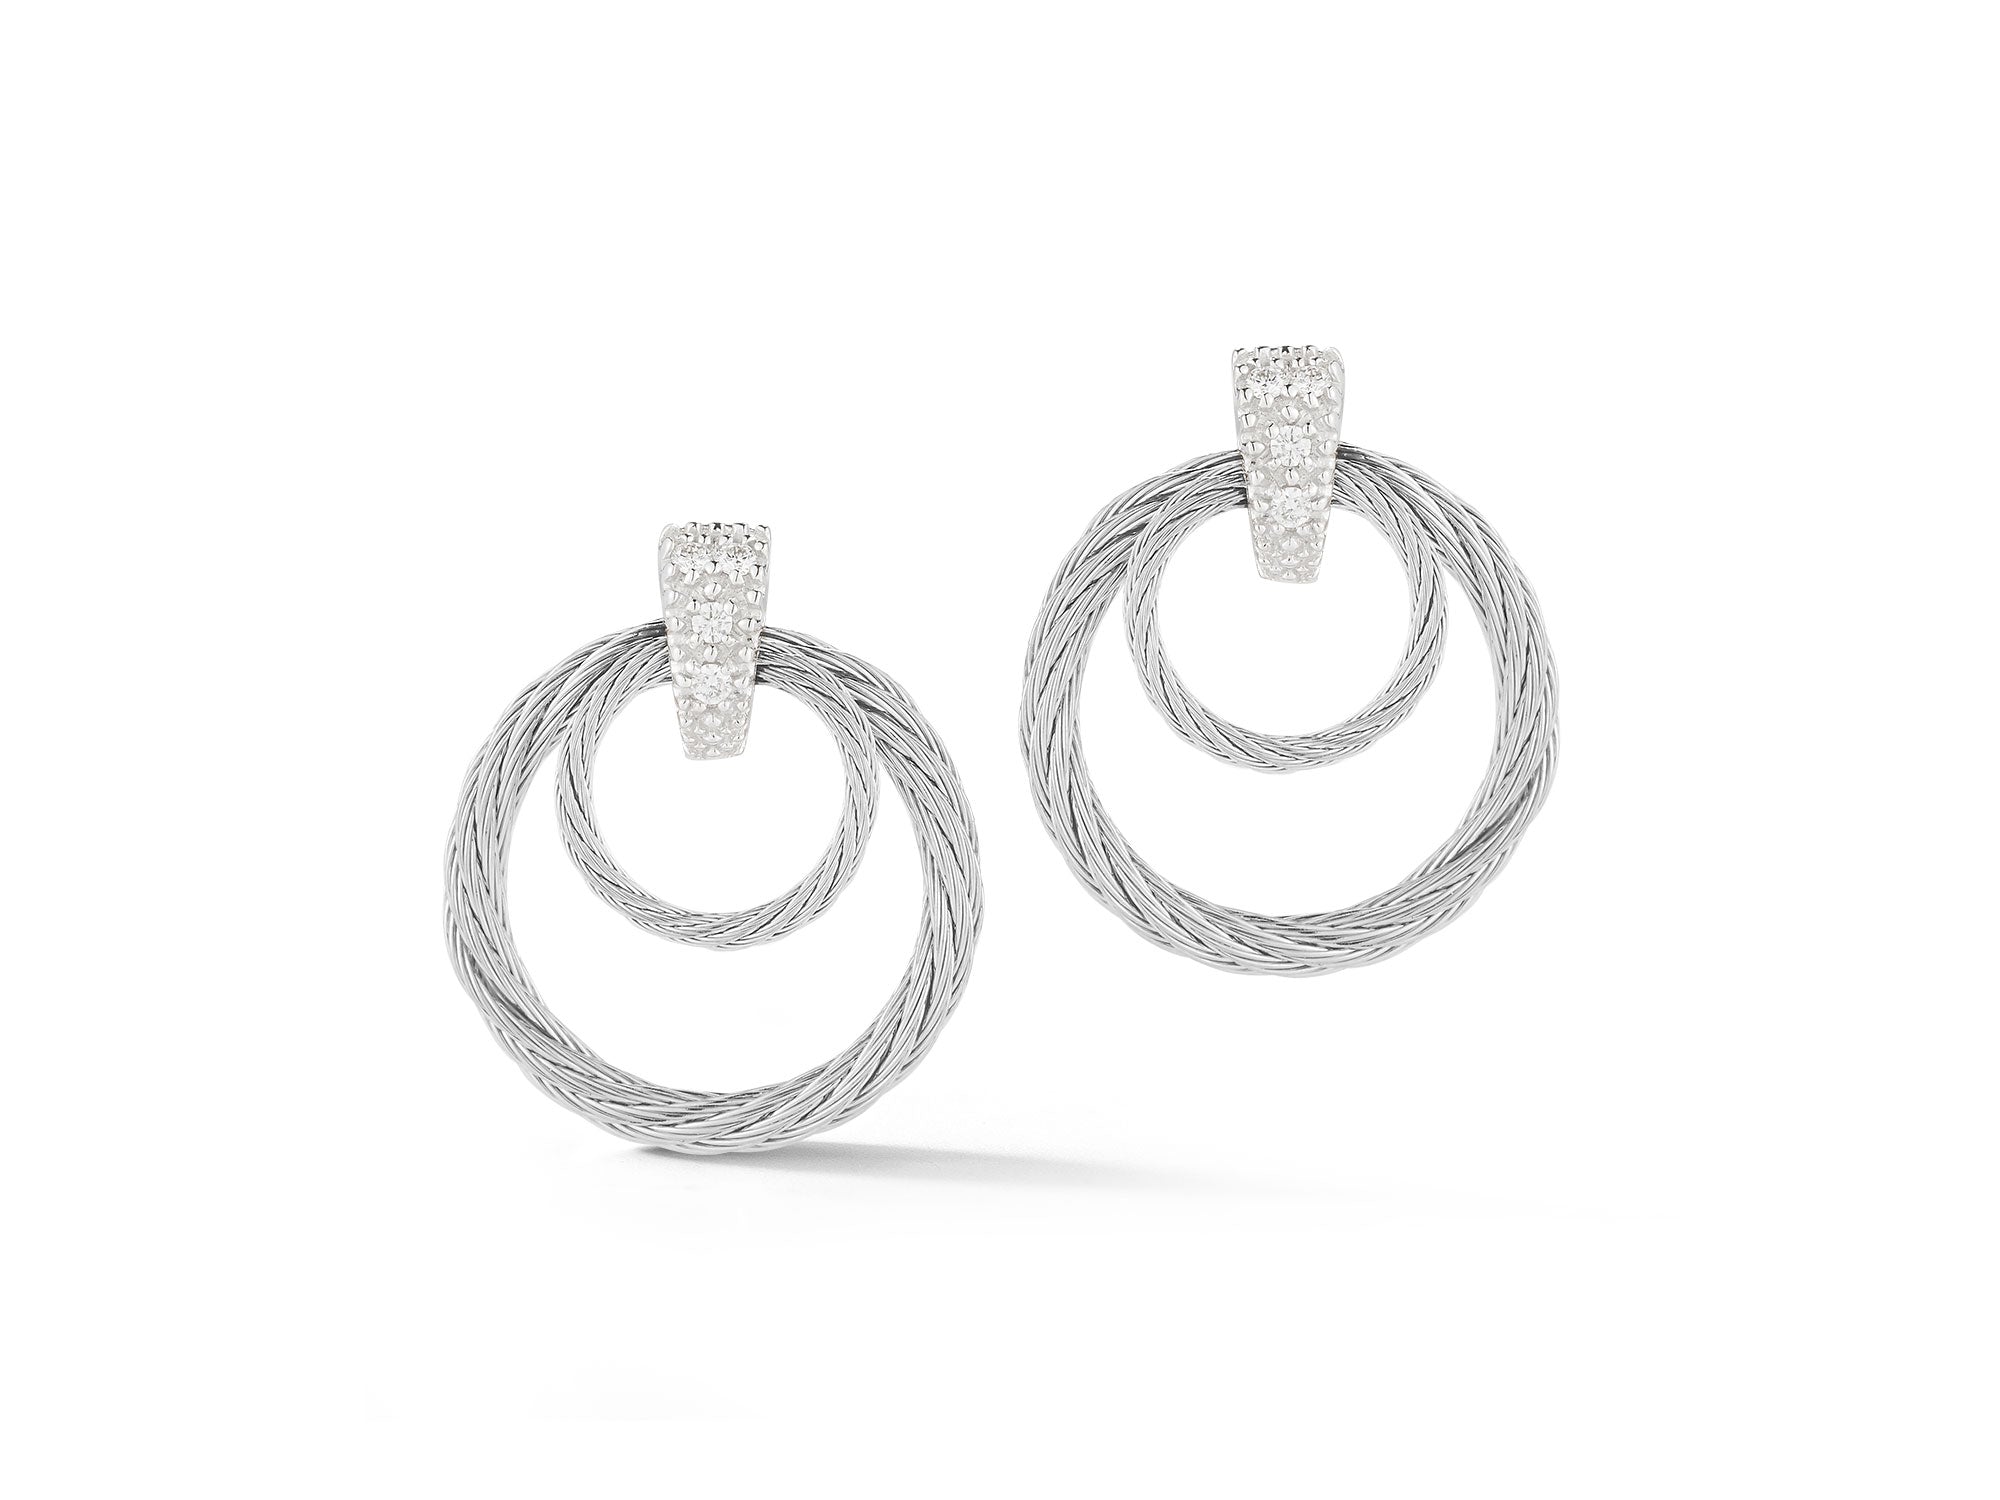 Grey Cable Droplet Stud Earrings with Diamonds